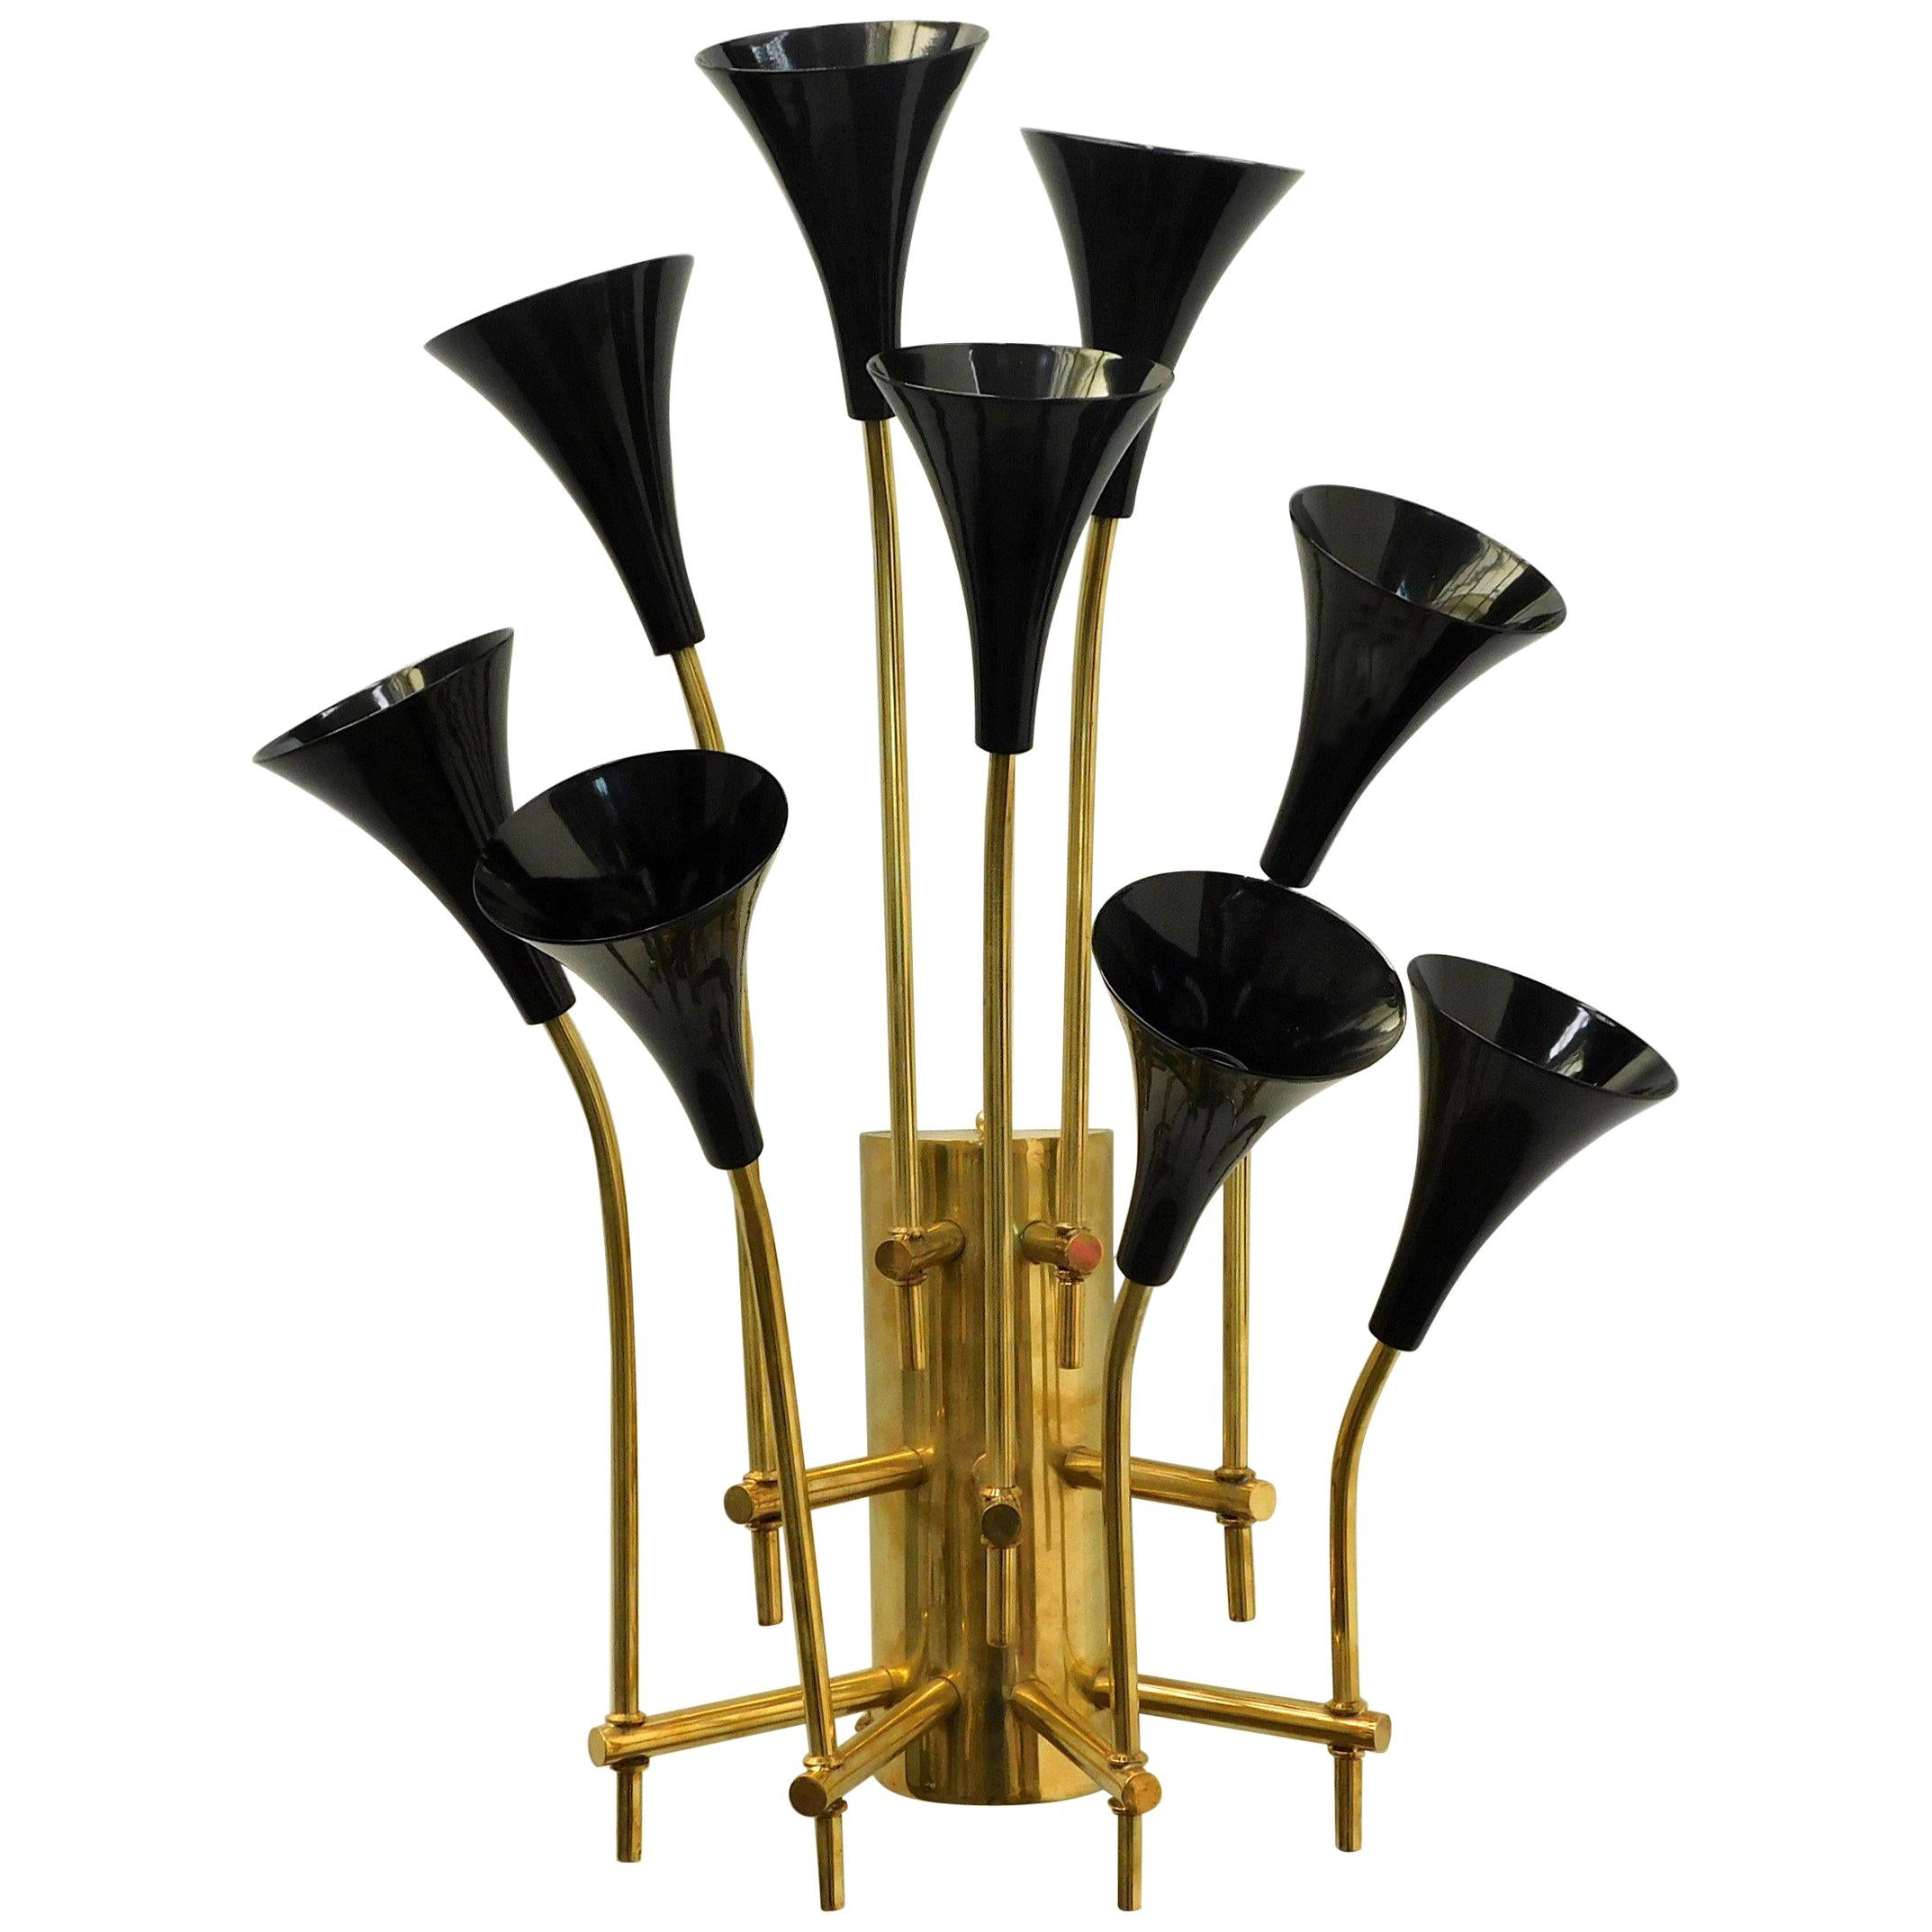 Limited edition Italian wall lights with nine black enameled metal trumpets mounted on polished brass frames / Designed by Fabio Bergomi for Fabio Ltd / Made in Italy
9 lights / E12 or E14 type/ max 40W each
Measures: Height 31 inches / Width 23